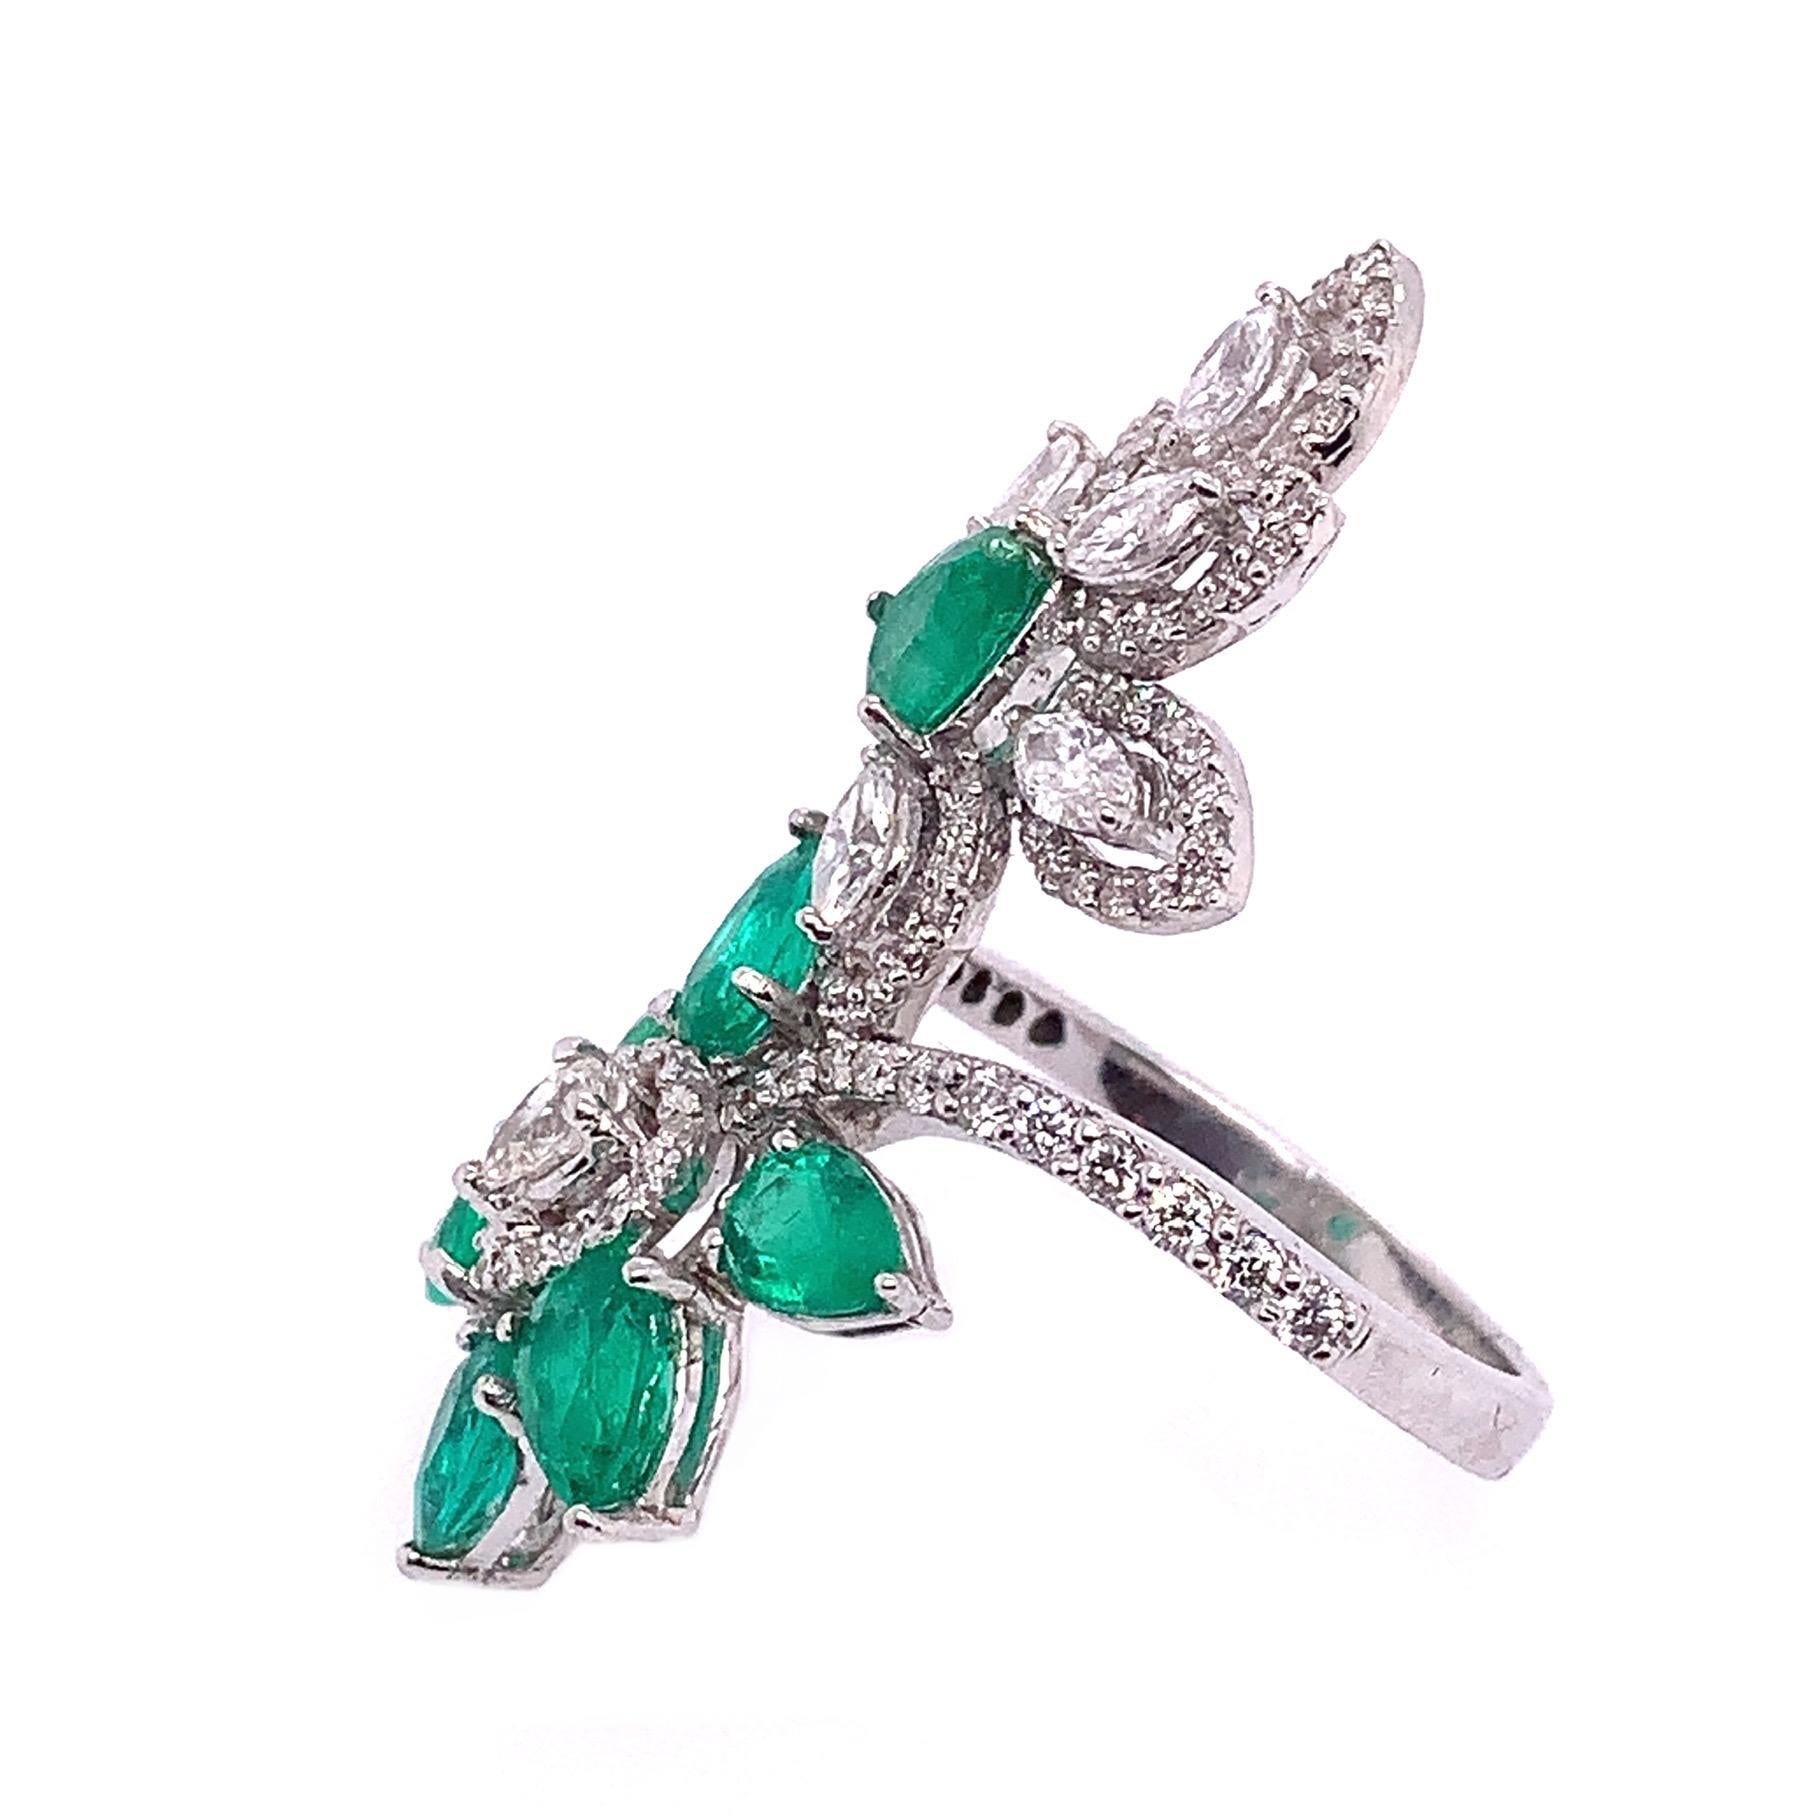 Jardin Collection

Leaf and flower cluster ring with pear shape Emerald and Diamond set in 18K white gold. Size 6.5 U.S.

Emerald : 2.30ct total weight.
Diamond : 1.41ct total weight.
All diamonds are G-H/SI stones.
